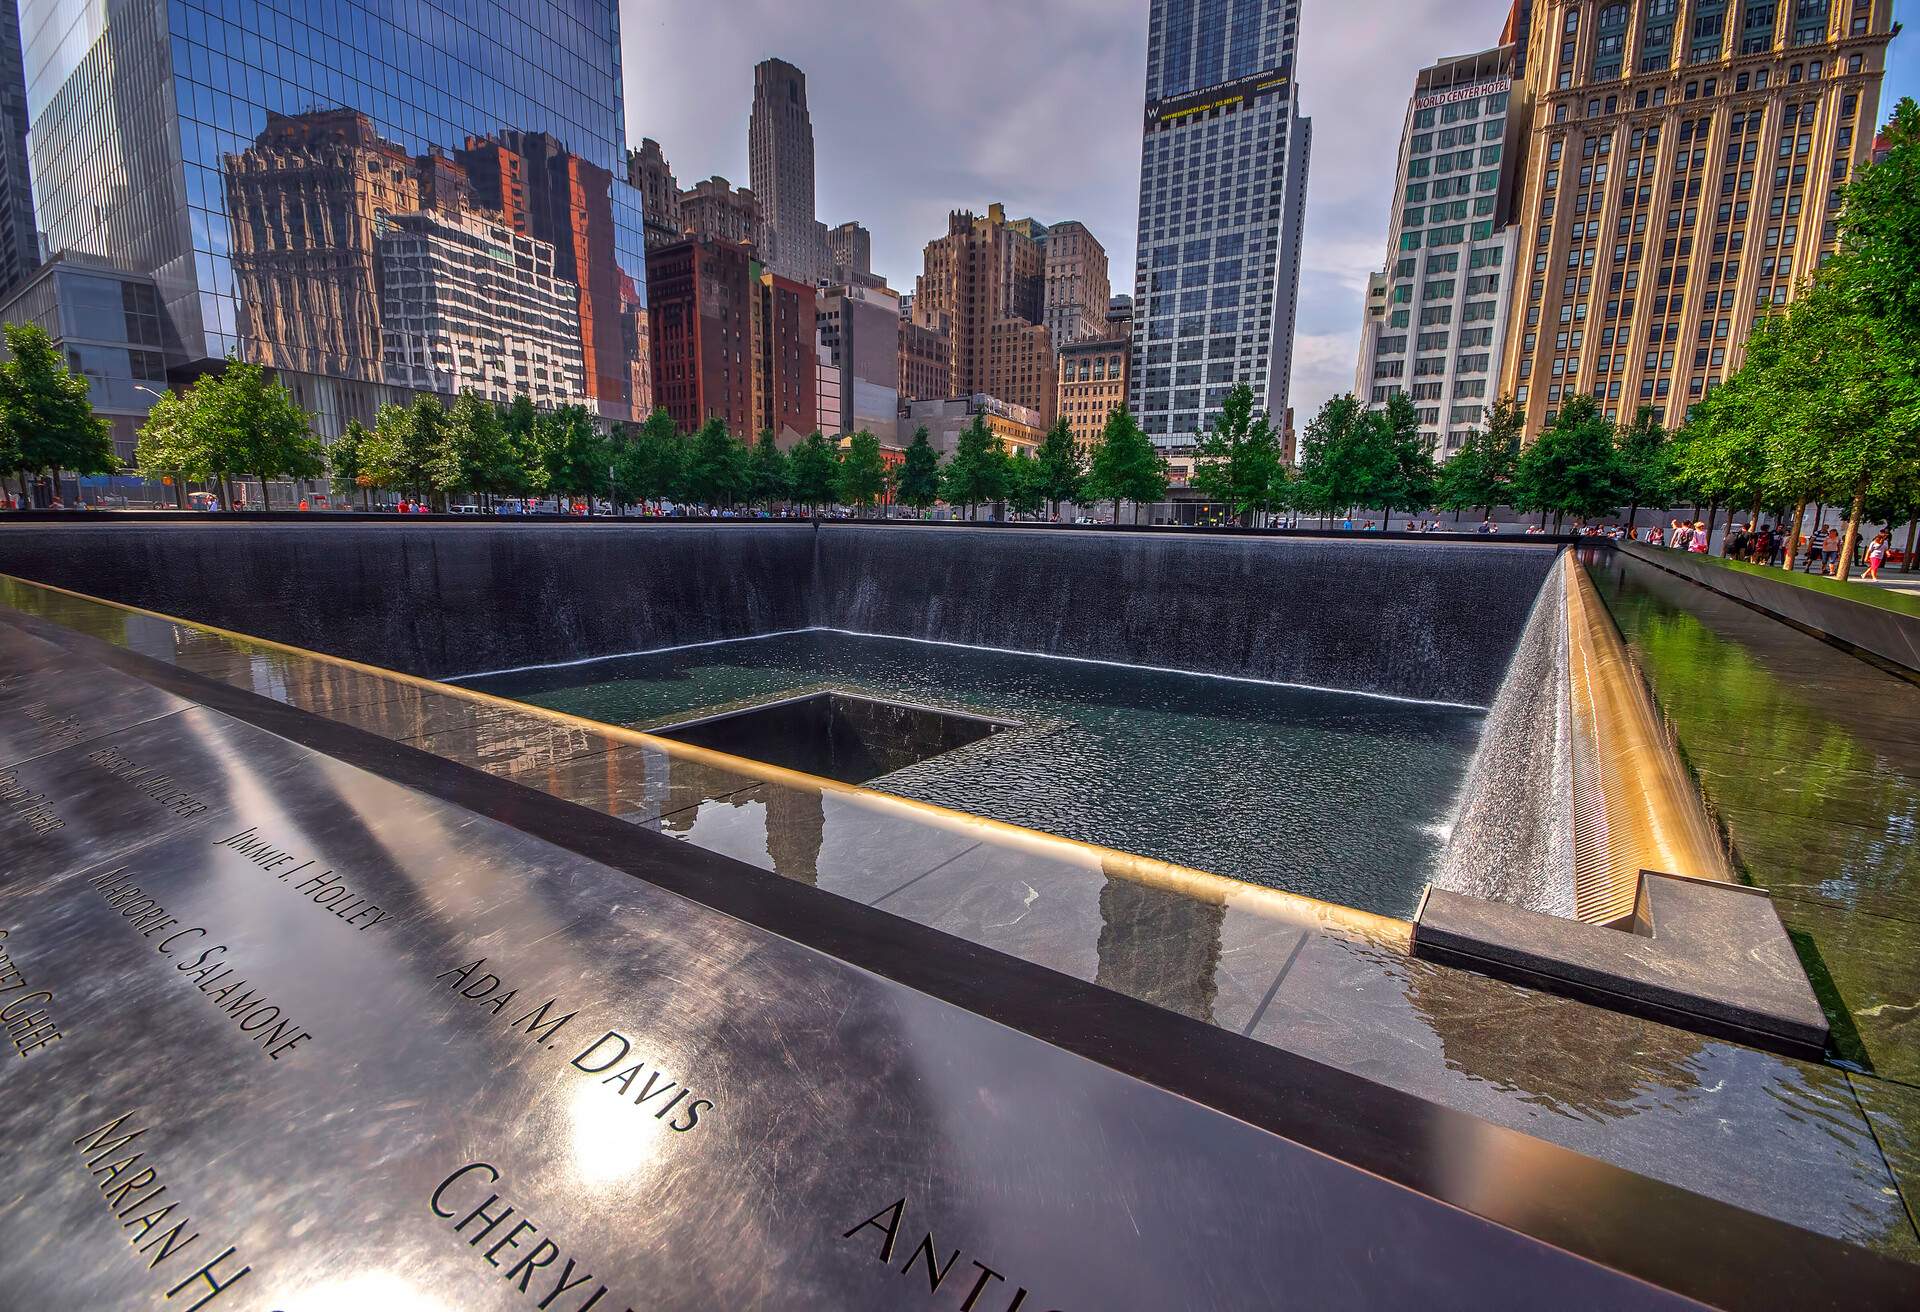 National September 11 Memorial and Museum features a square pool with a square void in the centre, an artificial waterfall, and names engraved in bronze ledges.